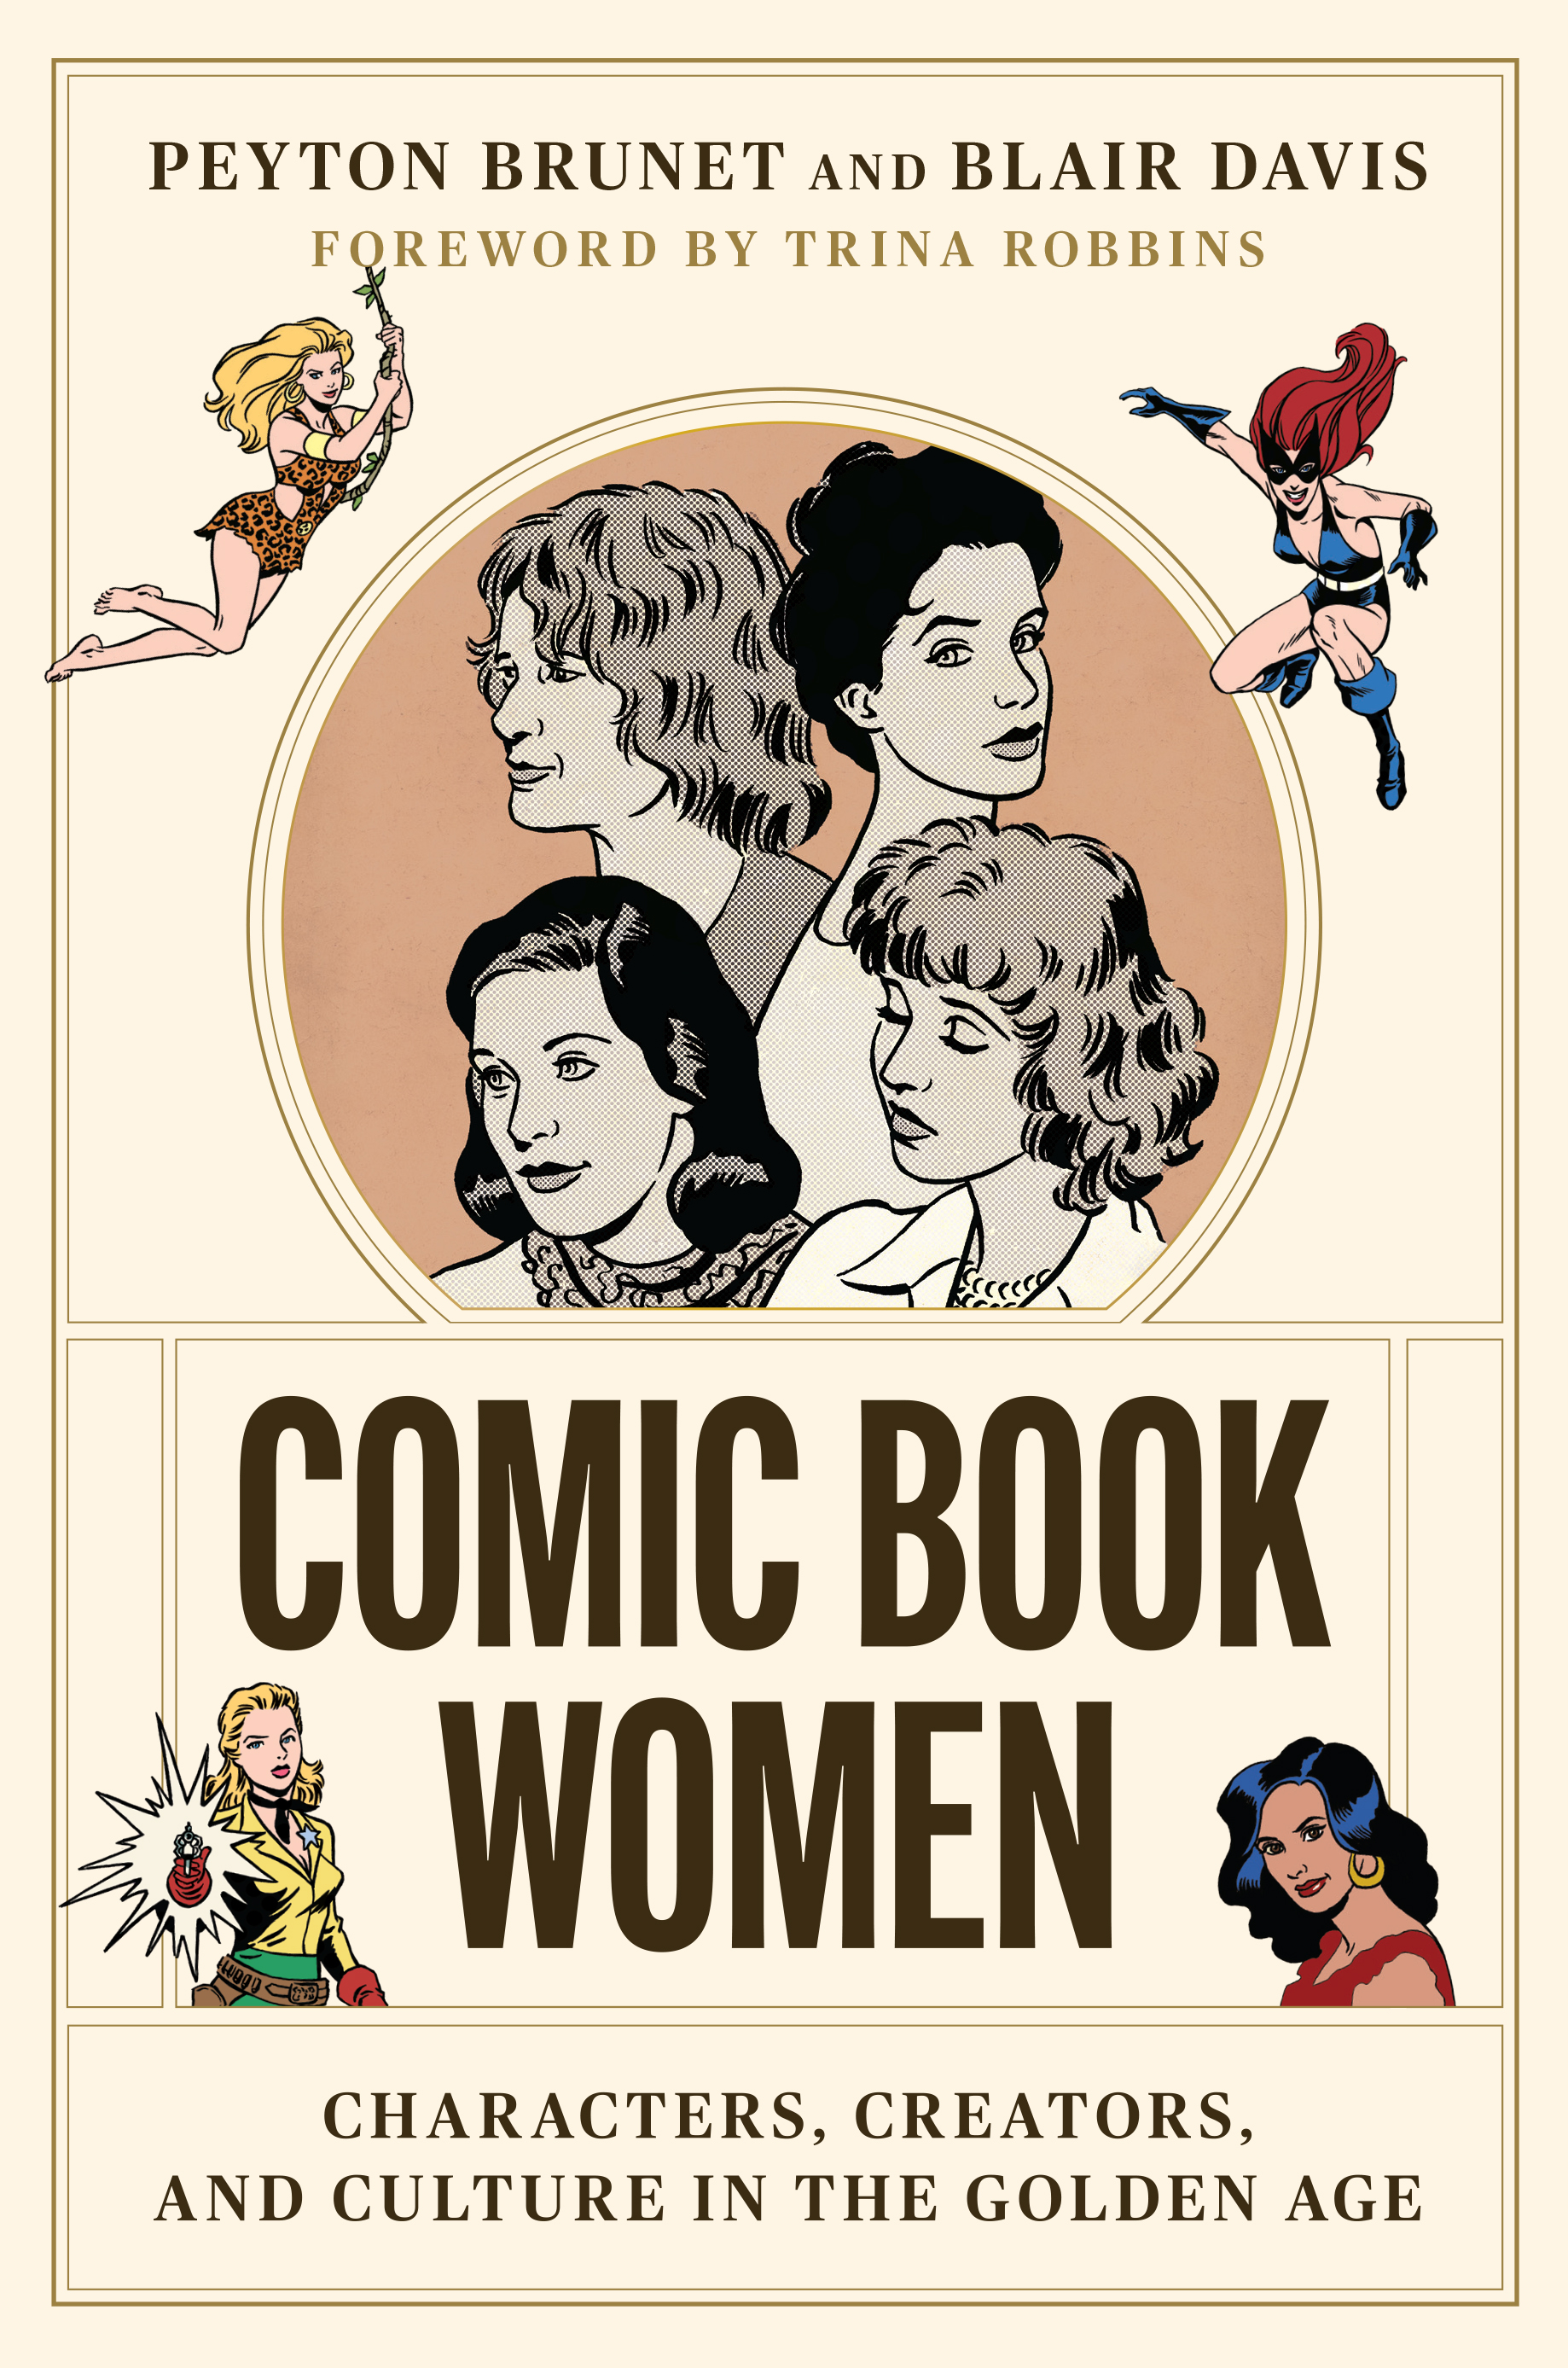 Comic Book for Women: Characters, Creators, and Culture in the Golden Age